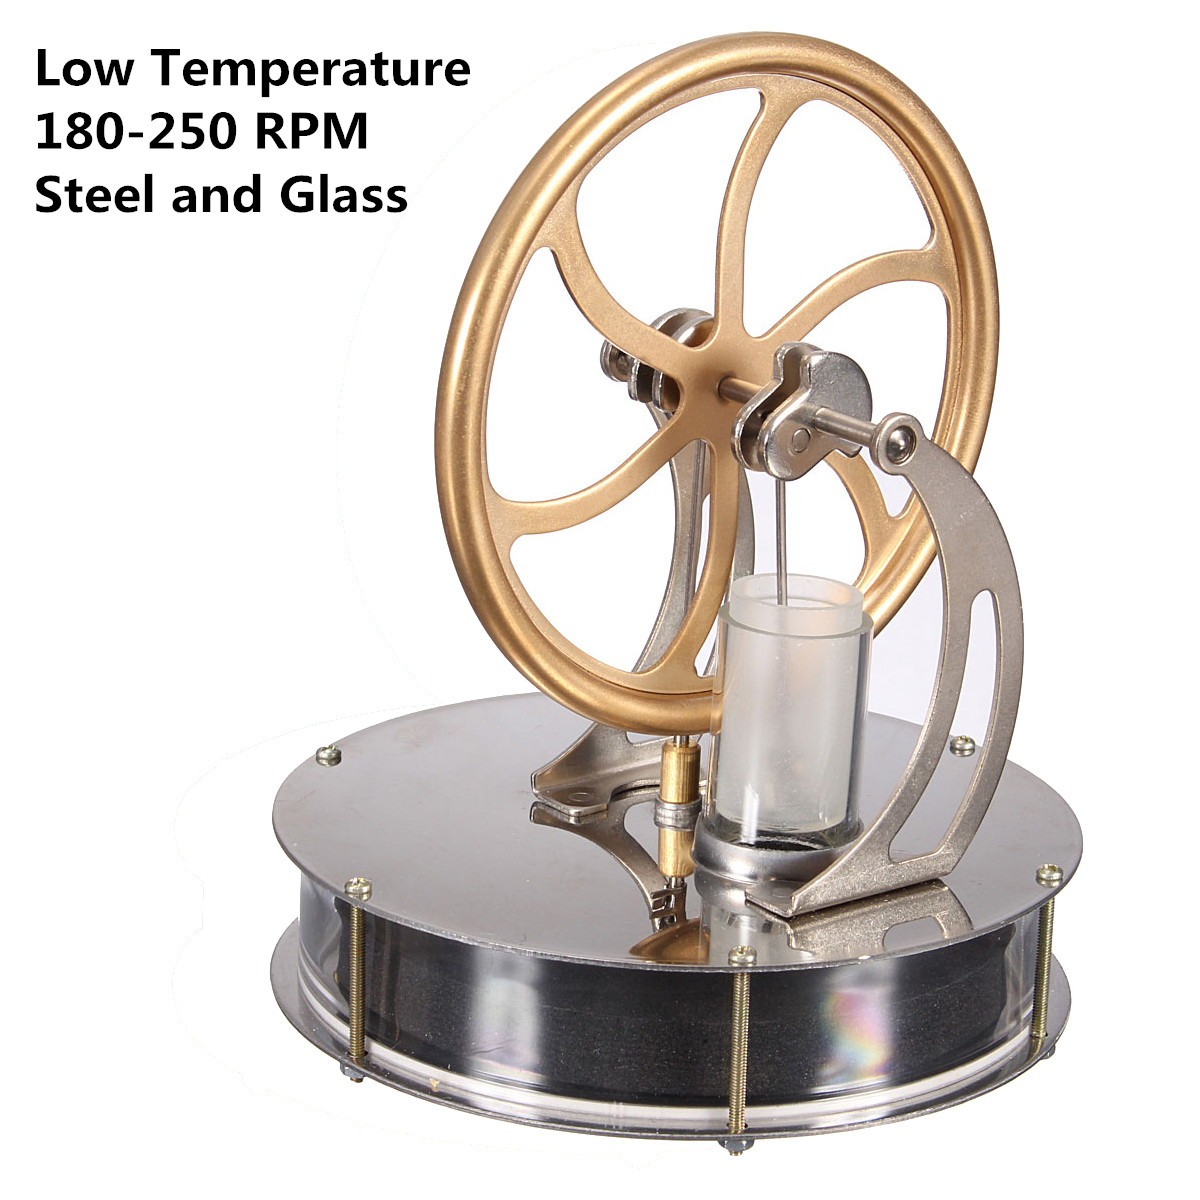 Low-Temperature-Stirling-Engine-Motor-Temperature-Difference-Cool-Model-Educational-Toy-1164414